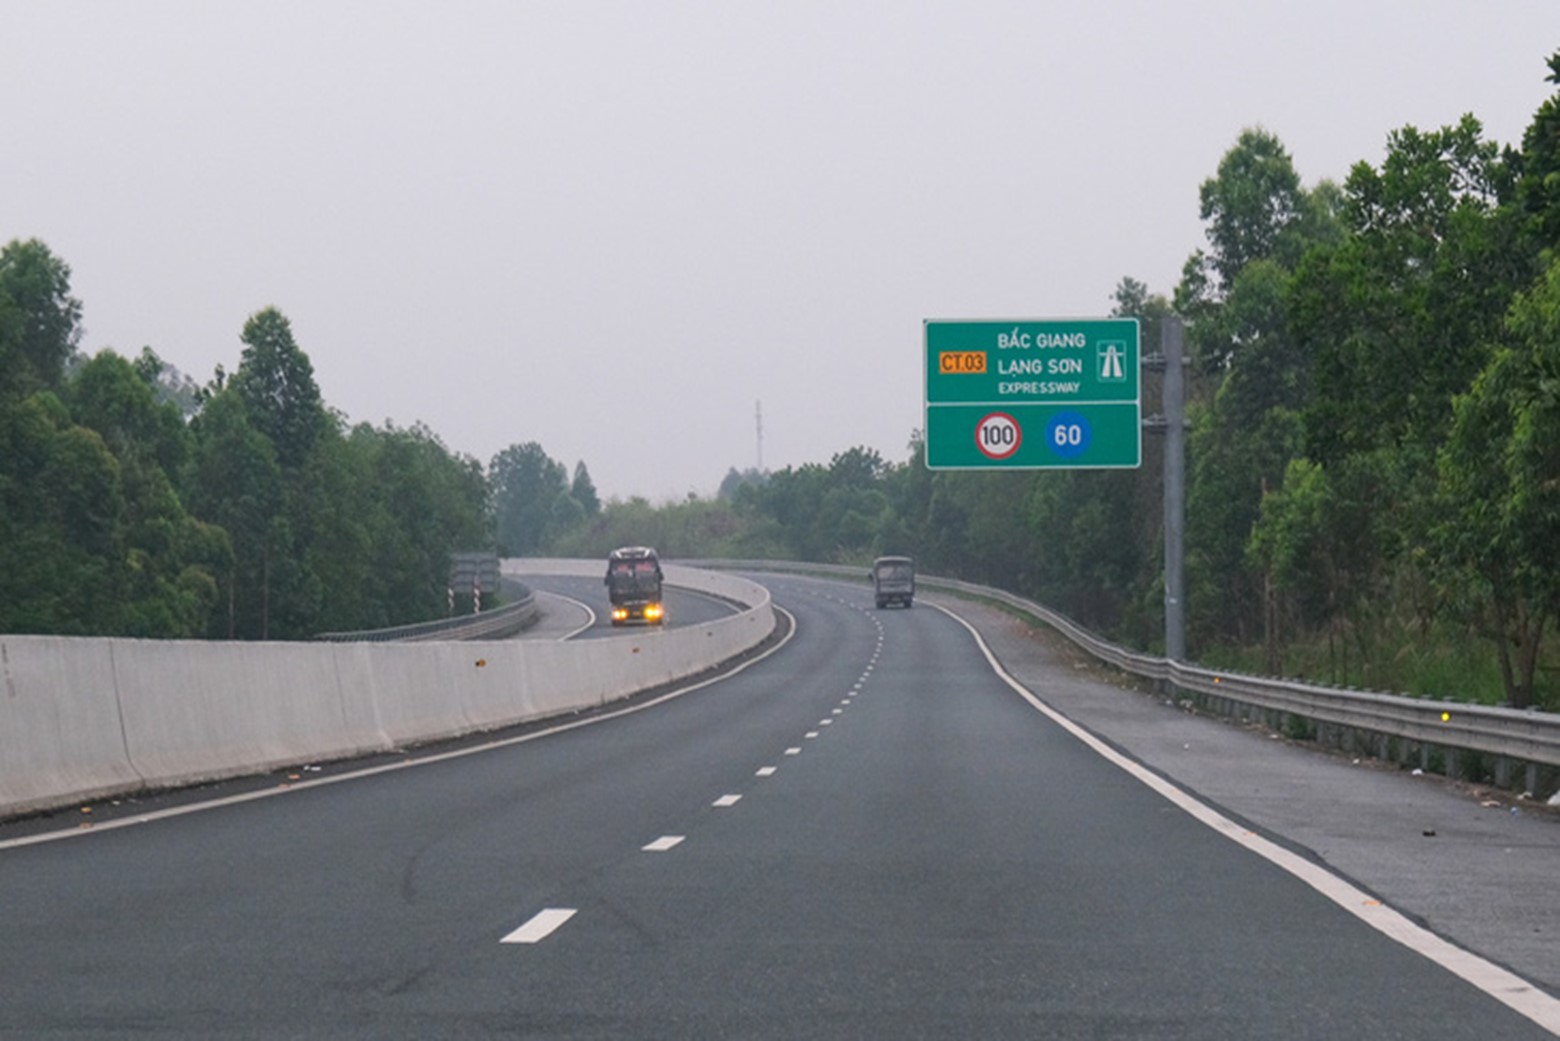 A section of the Bac Giang - Lang Son Expressway which has been opened to traffic. Once the Huu Nghi – Chi Lang Expressway is completed, the two expressways will be connected to pave the way from Hanoi to the border with China. Photo: Ha Quan / Tuoi Tre